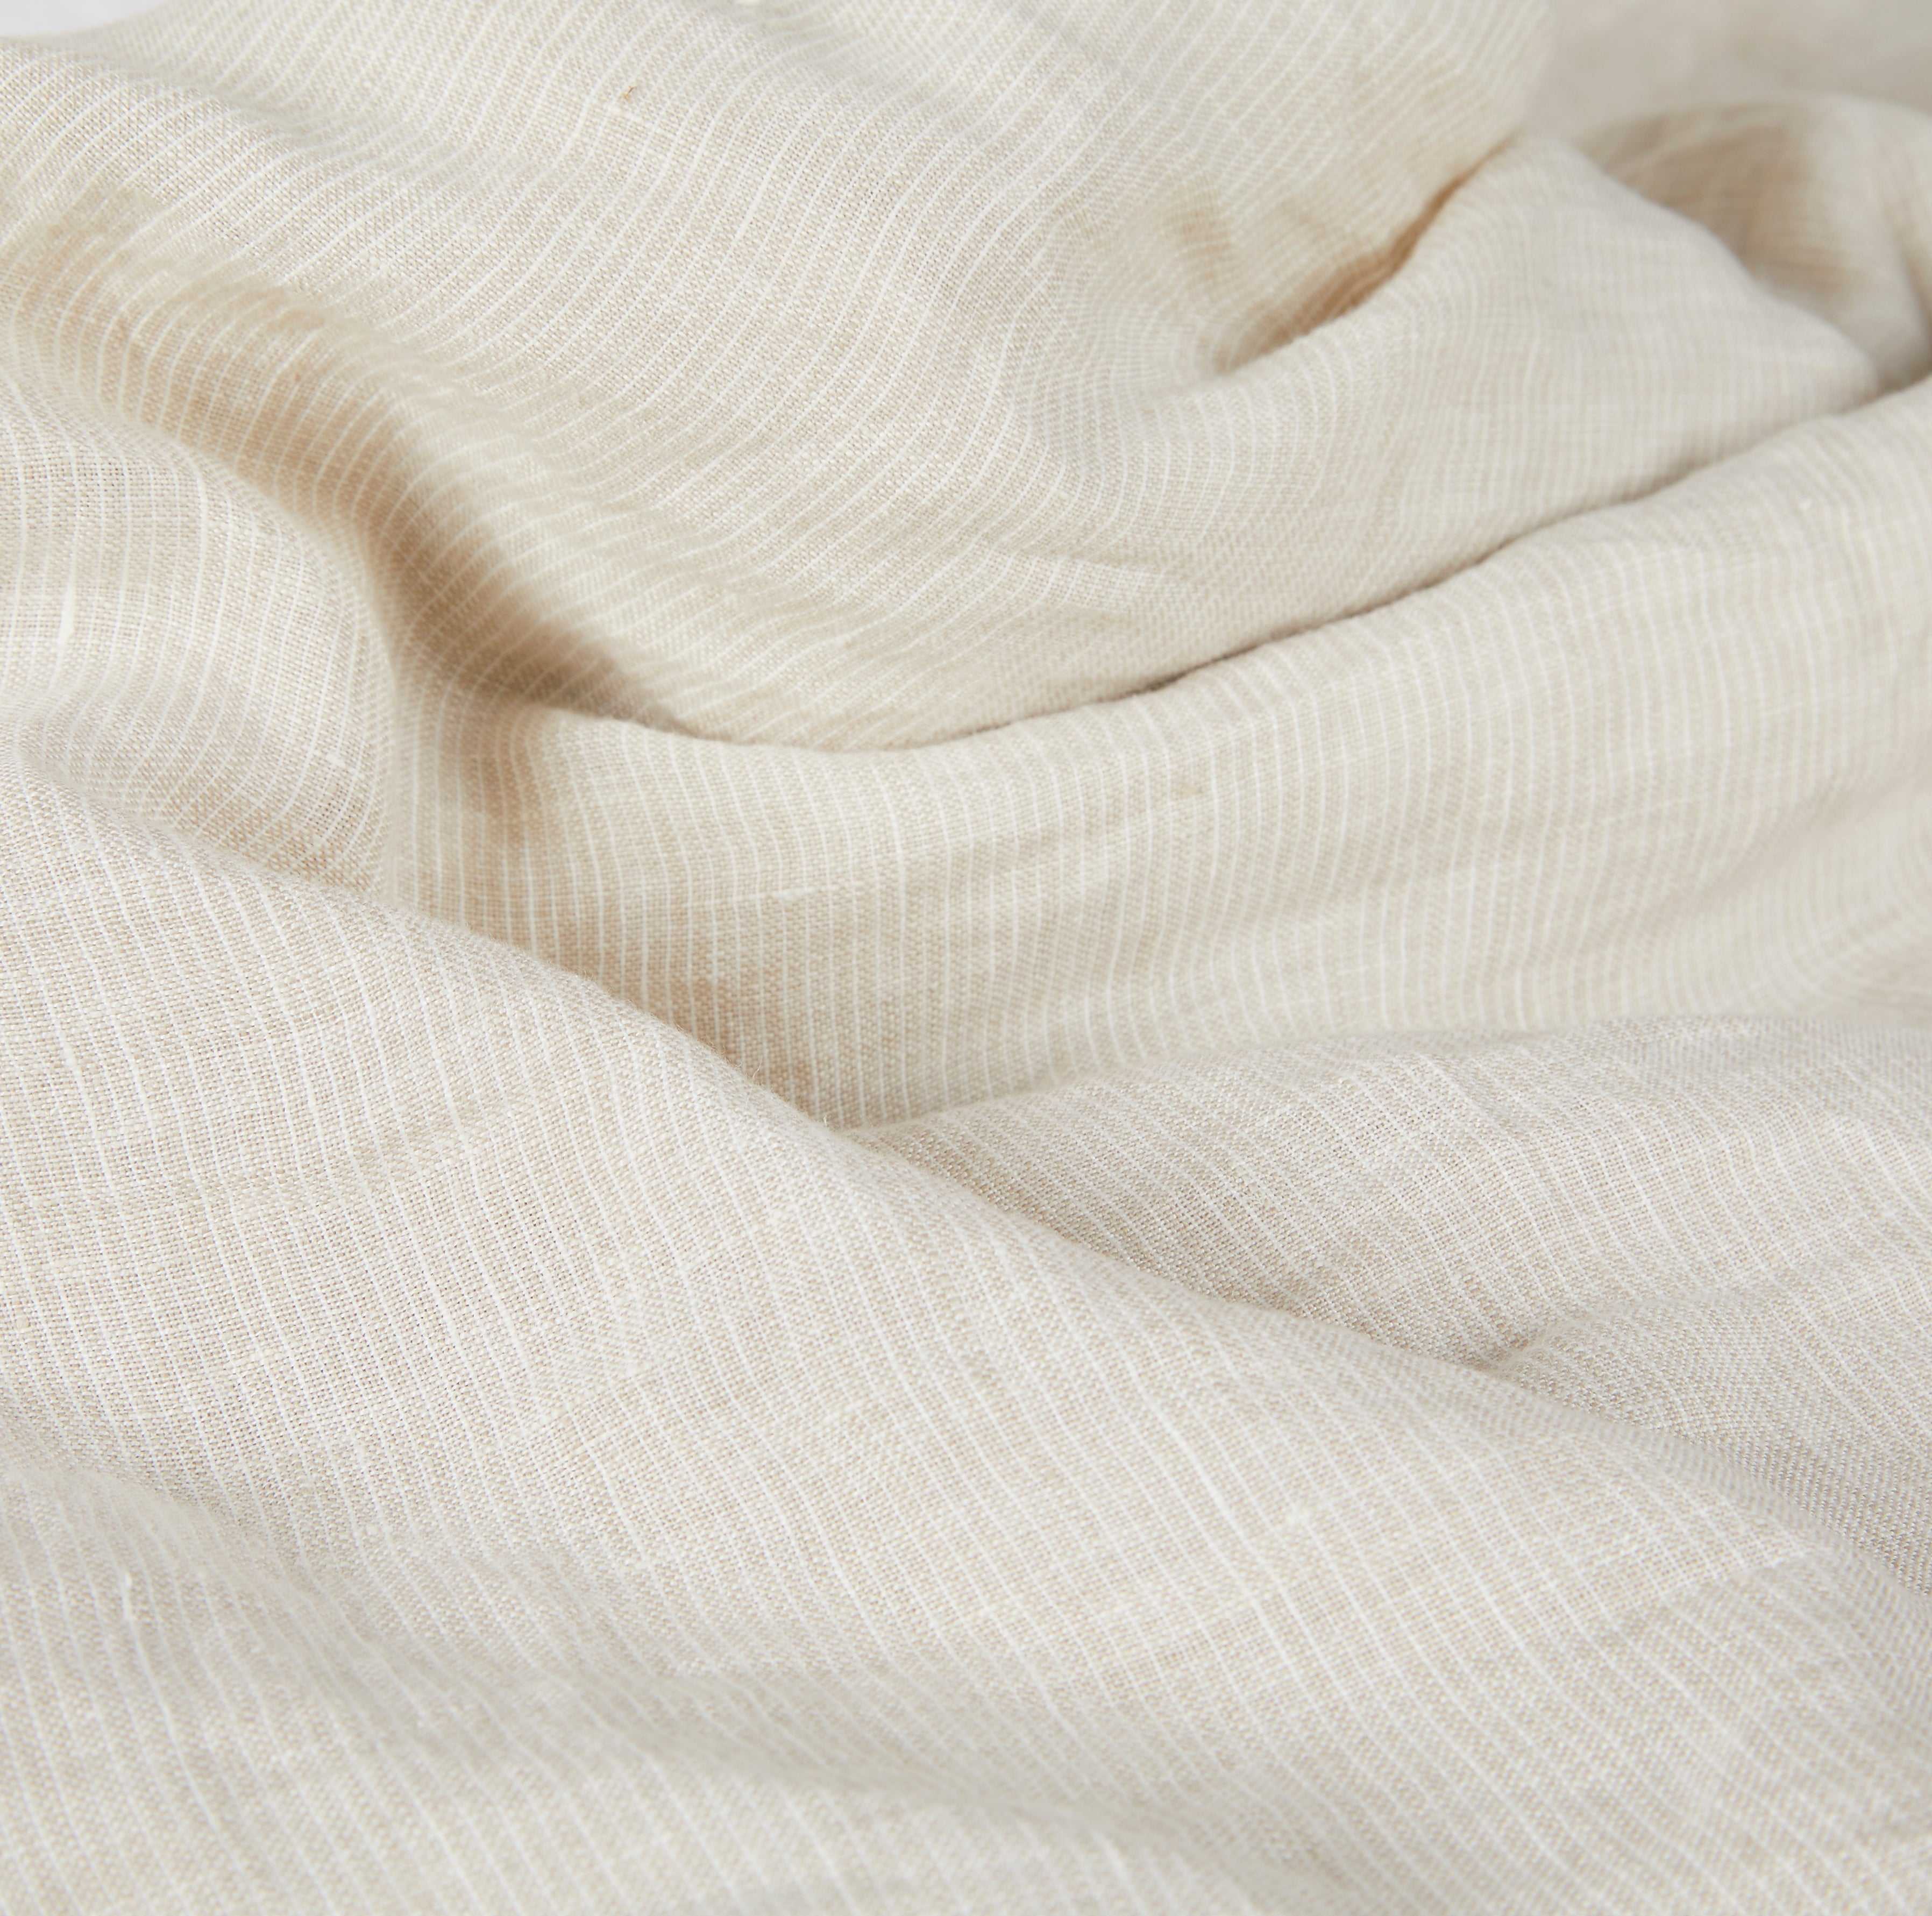 Stonewashed linen fitted sheet, beige striped - By Native